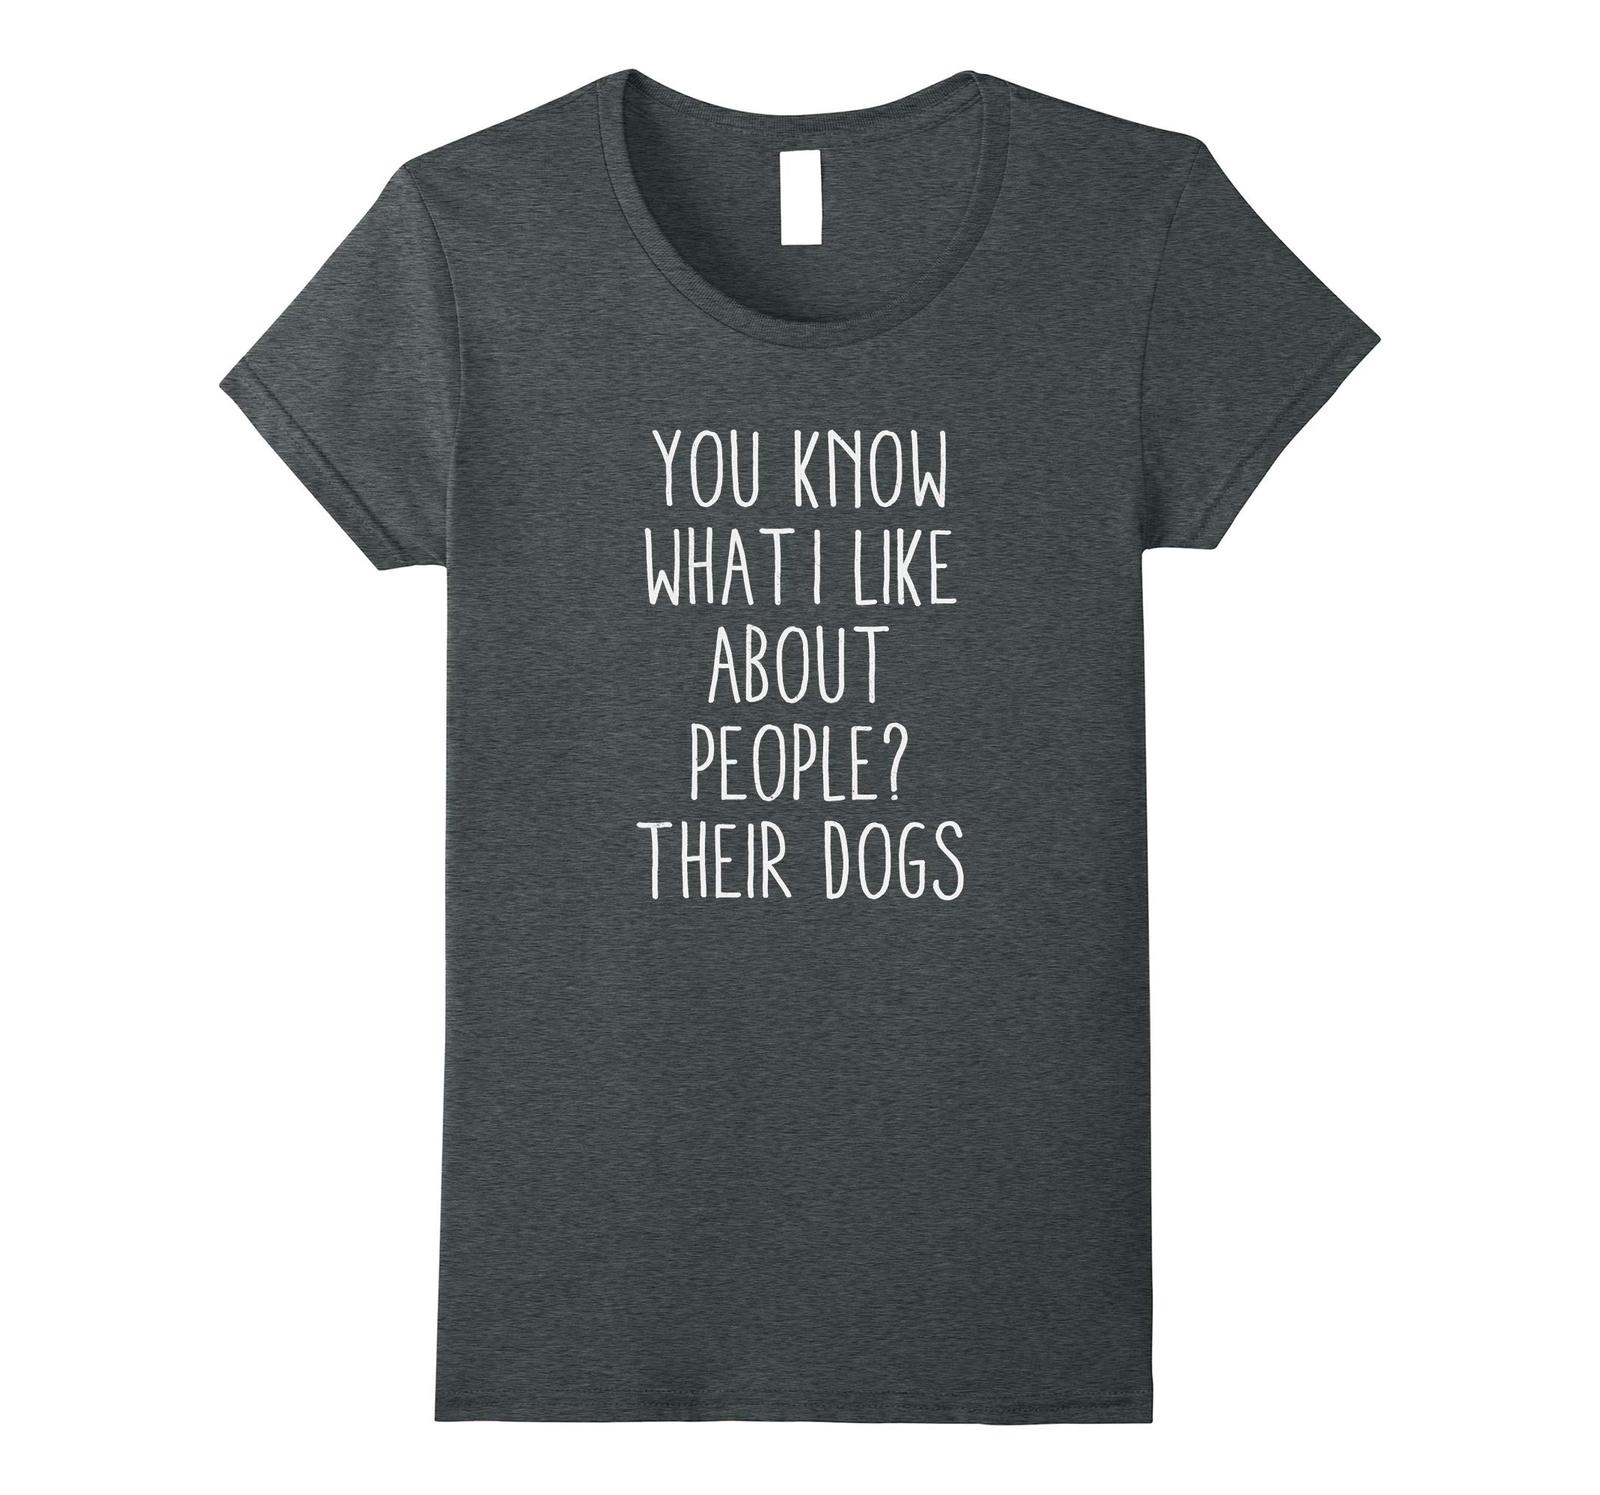 Dog Fashion - You know what I like about people? Their dogs. Funny t-shirt Wowen